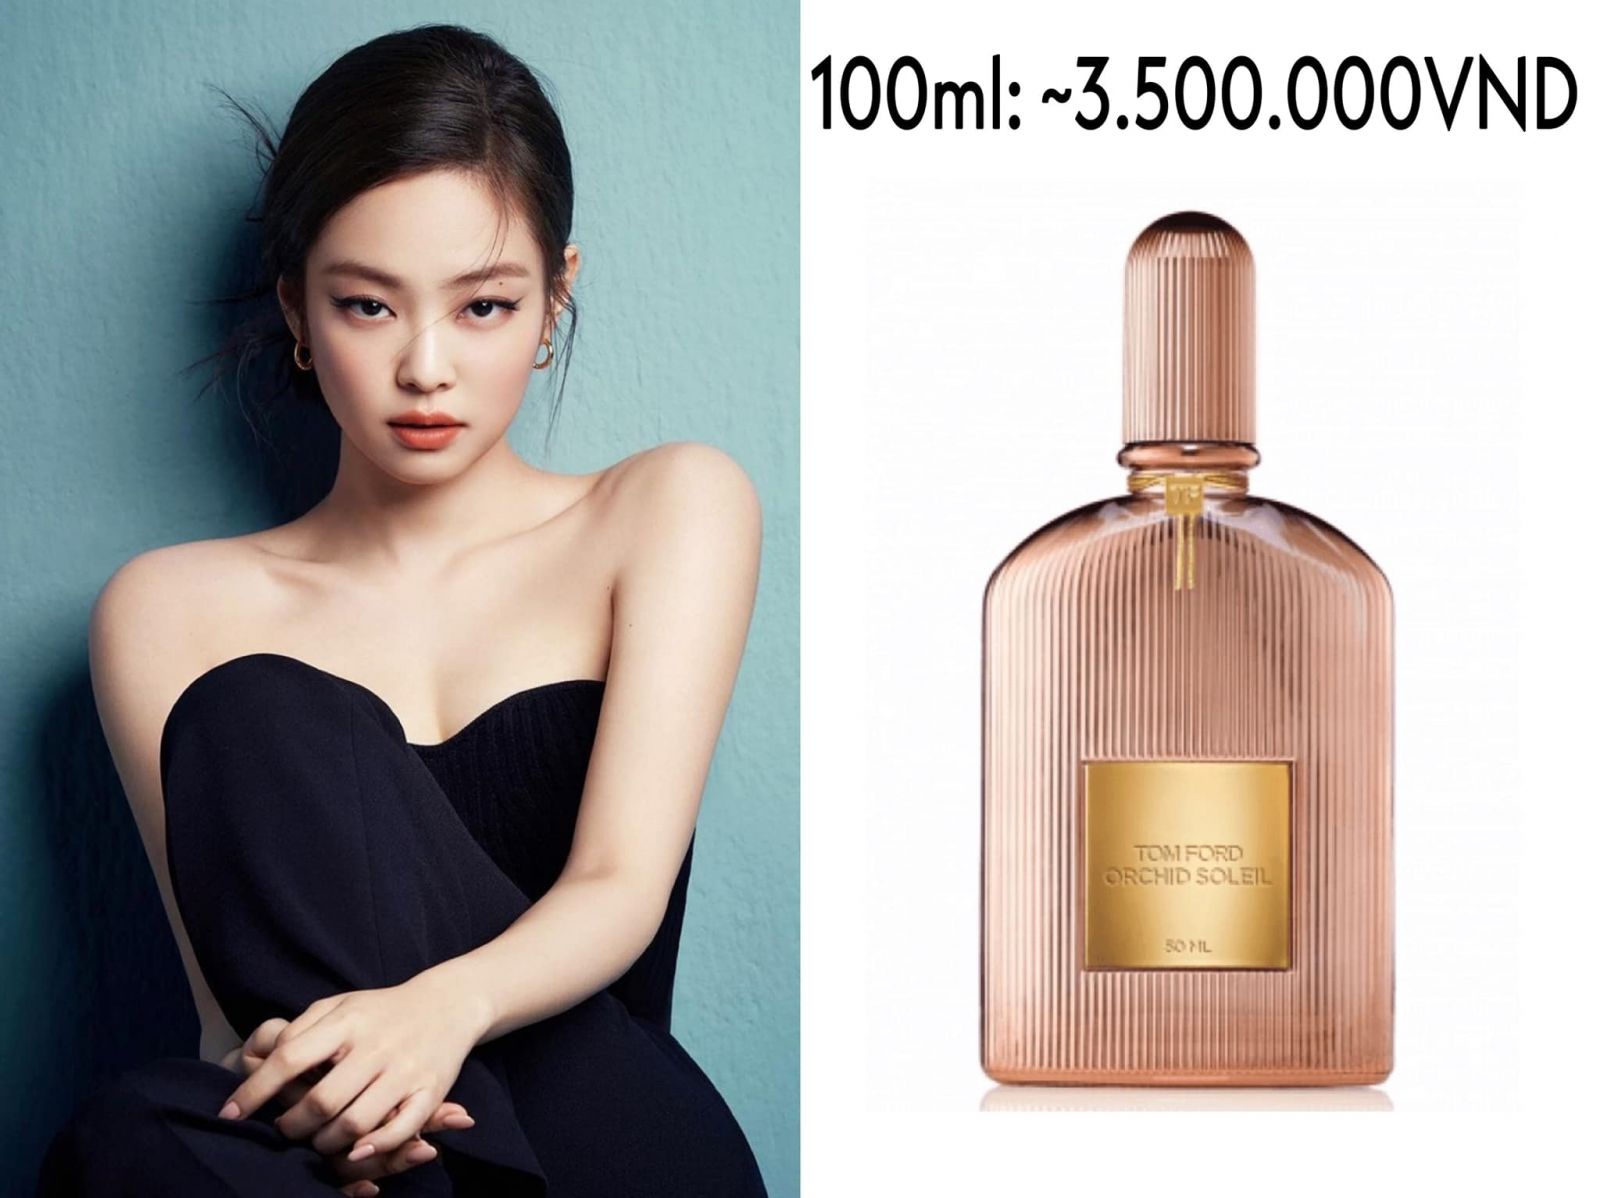 Orchid Soleil của Tom Ford